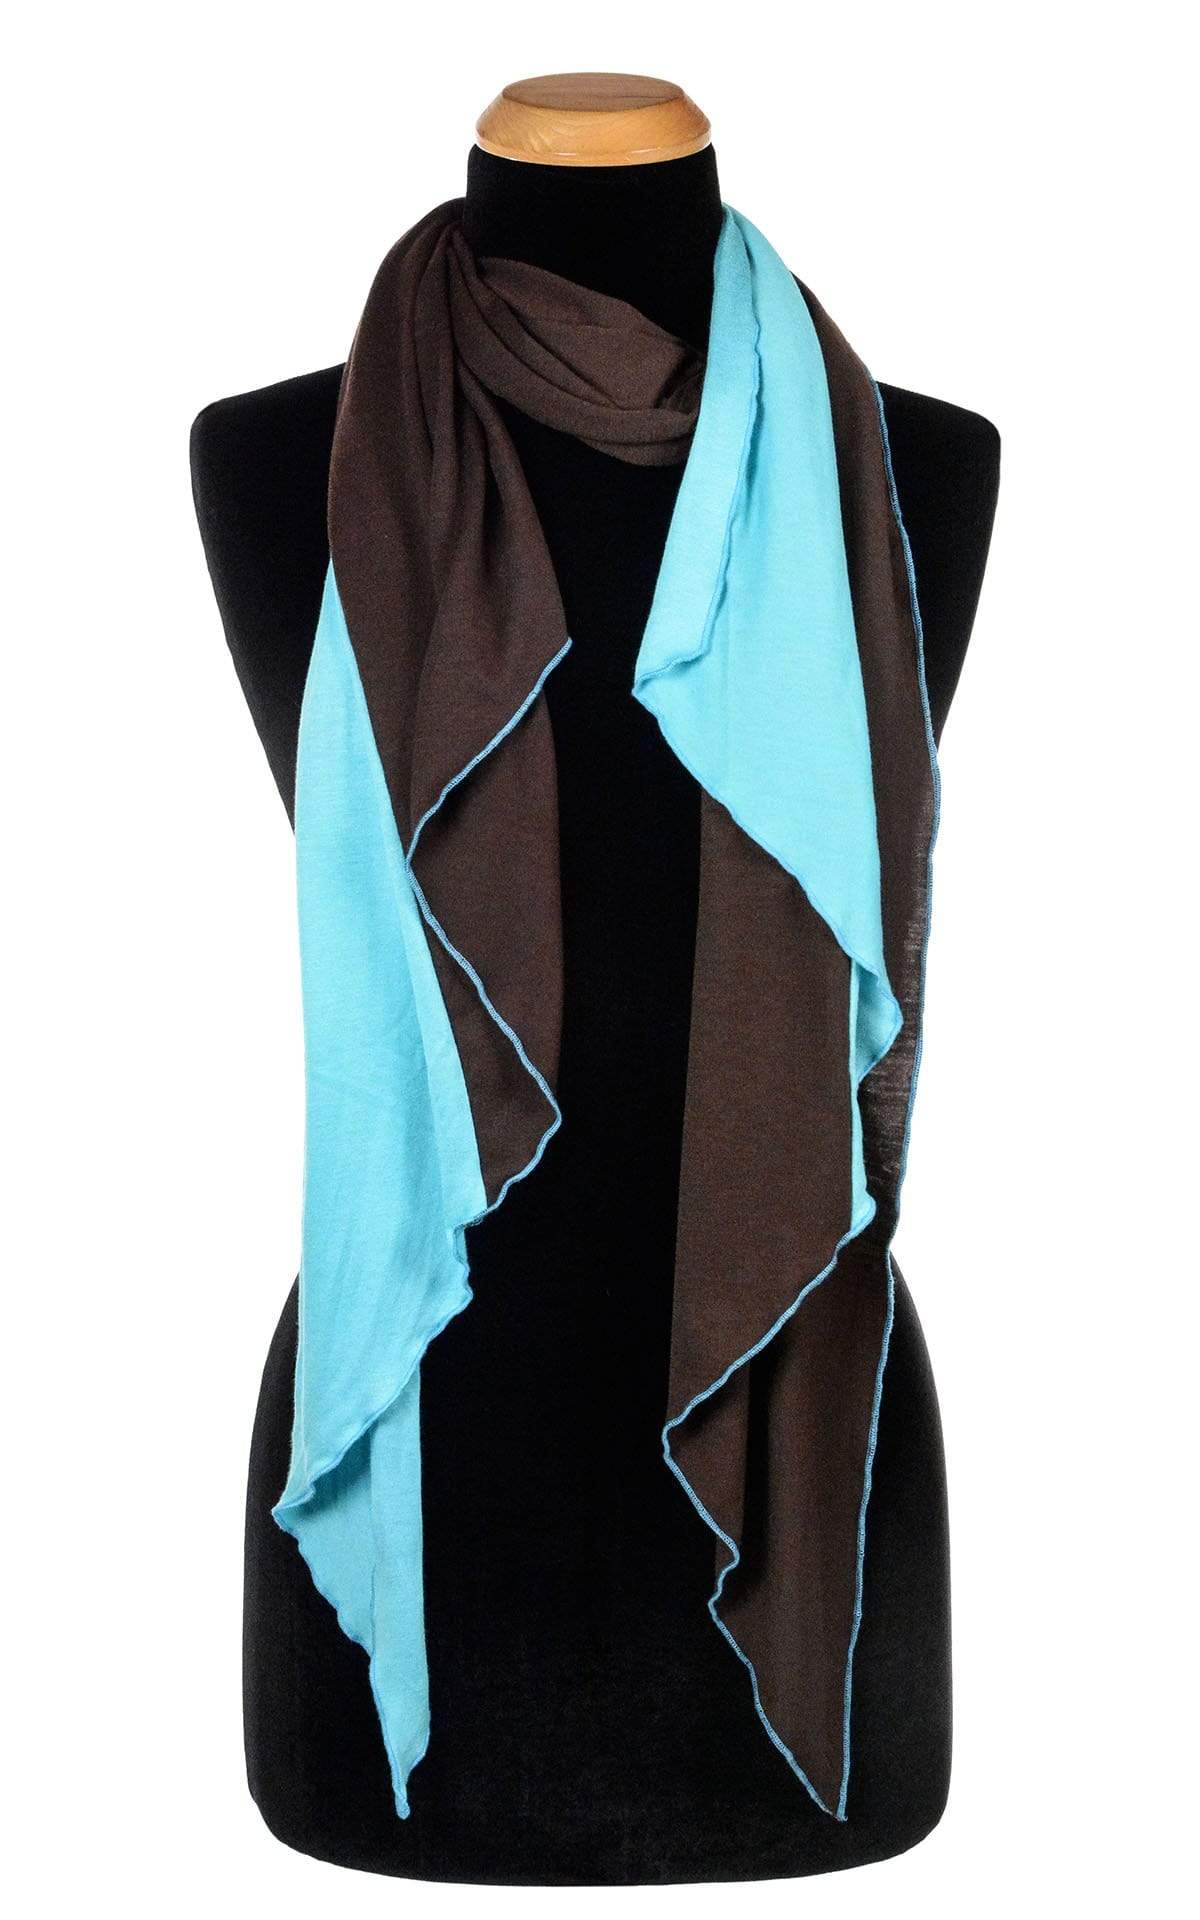 Ladies Large Handkerchief Scarf, Wrap jersey knit fabric on a mannequin | Terra W/ Ocean of Emptiness, Chocolate brown and Light Blue| Handmade in Seattle WA | Pandemonium Millinery